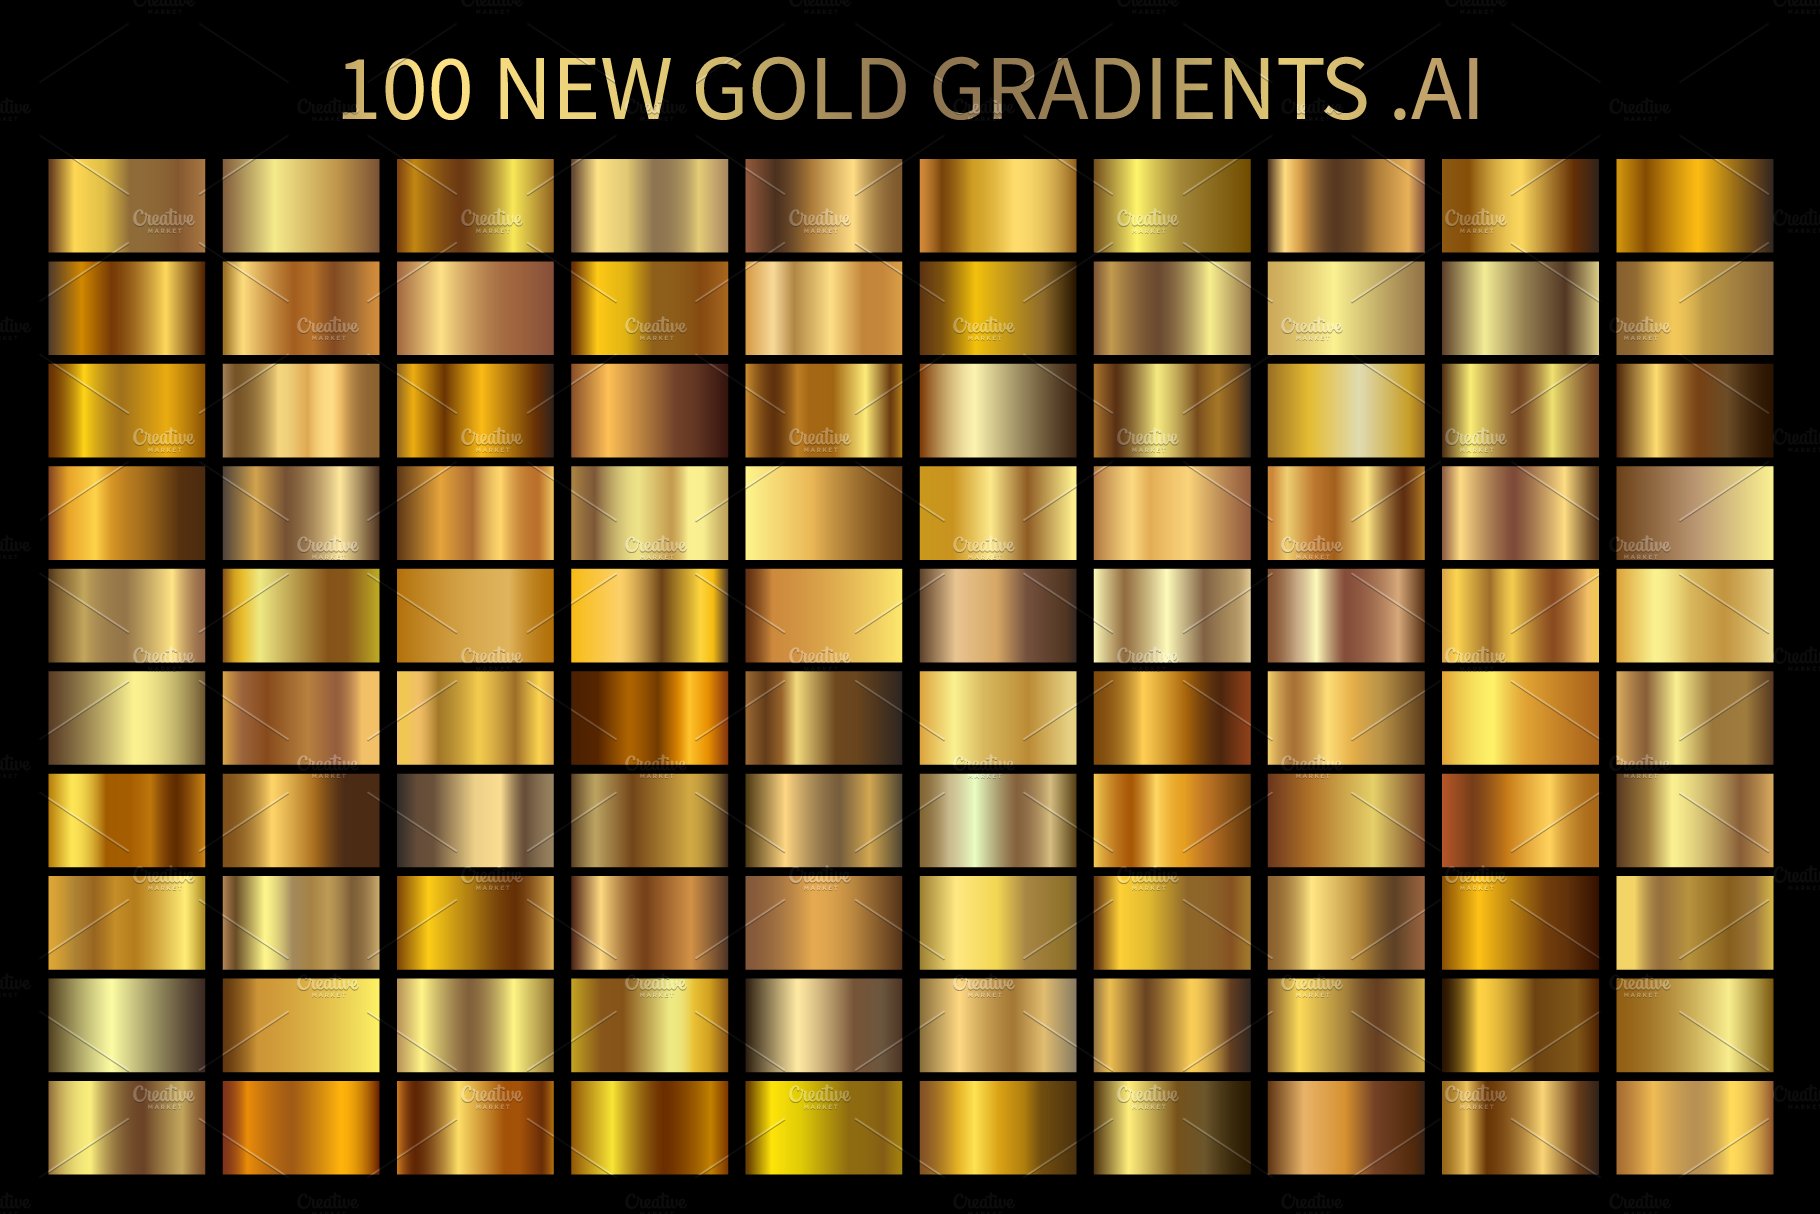 100 New Gold Gradients .AI cover image.